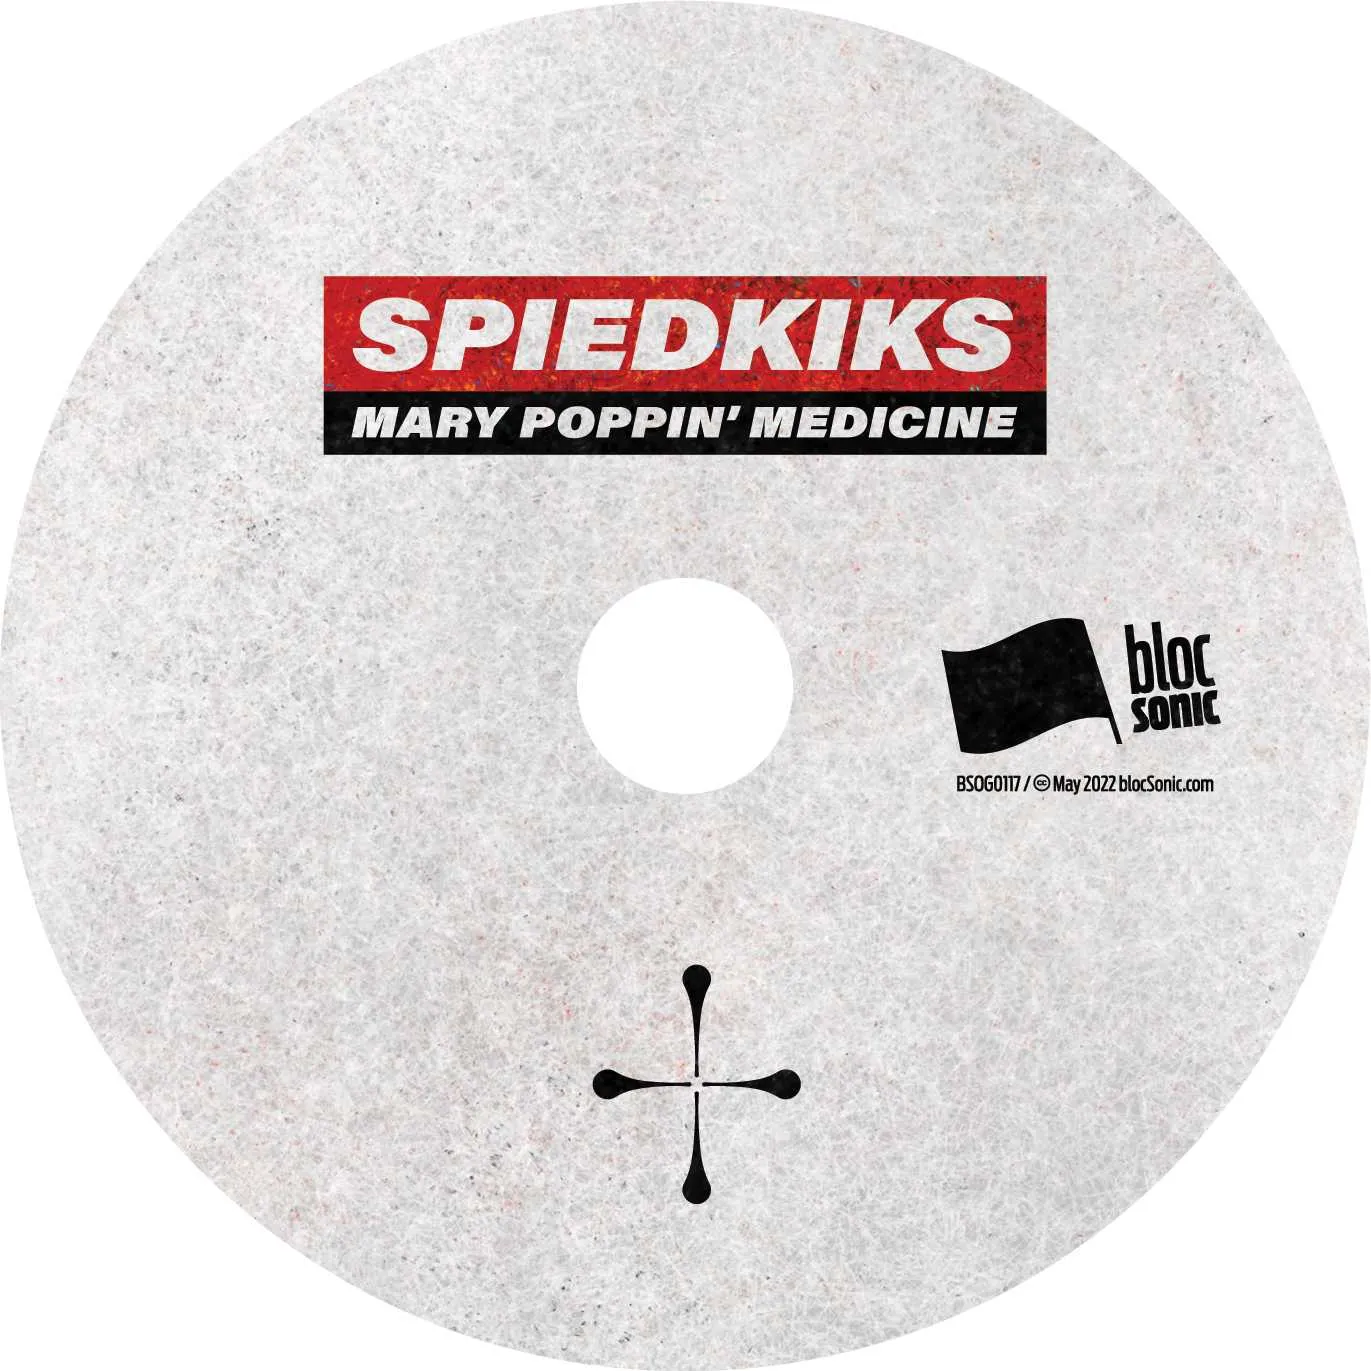 Album disc for “Mary Poppin' Medicine” by Spiedkiks